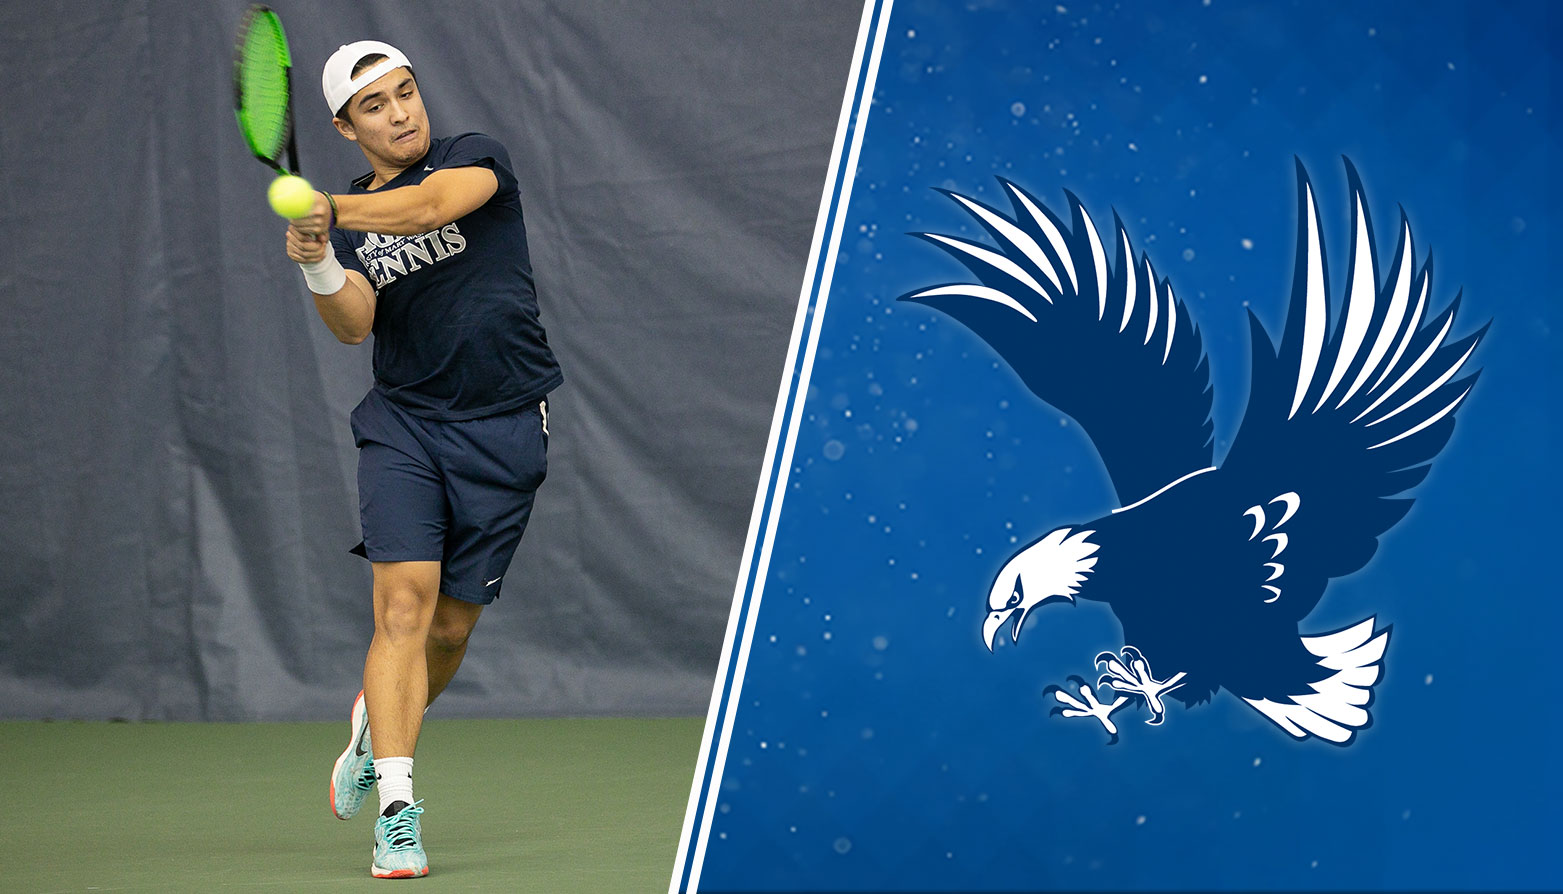 Mary Washington's Michael Fleming Named CAC Men's Tennis Player of the Week